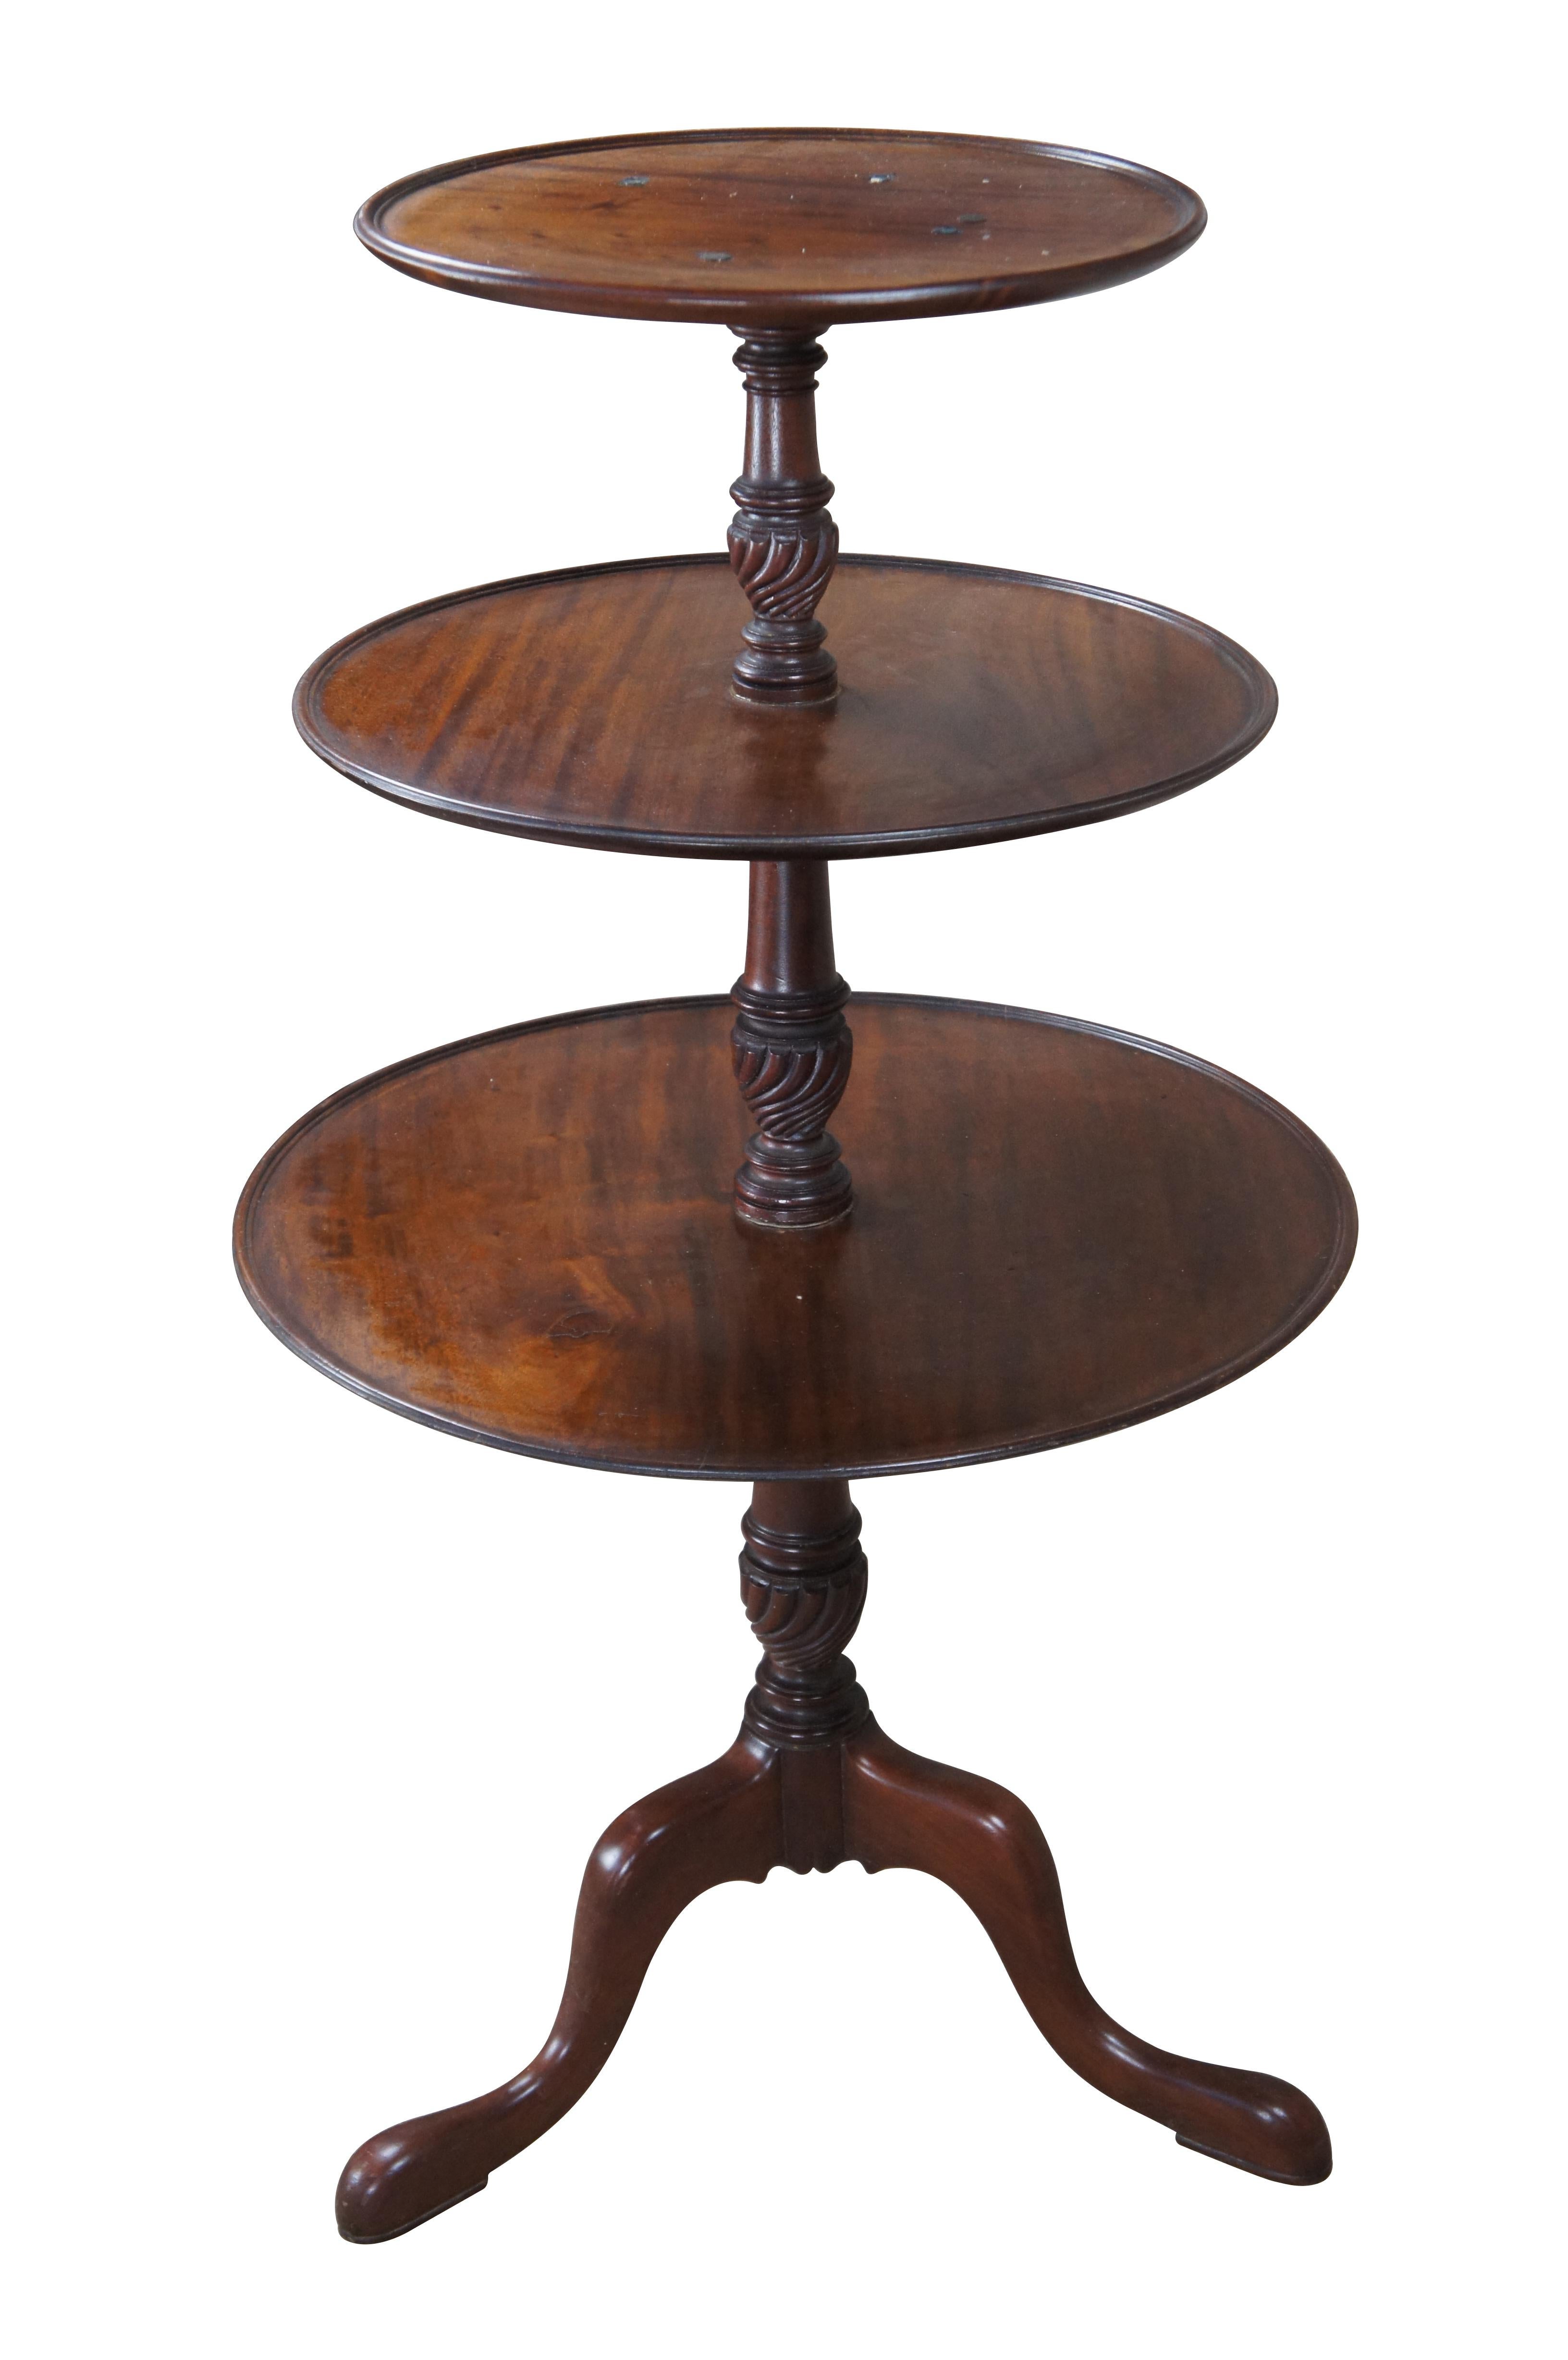 Vintage 20th Century English Georgian butler table. Made from solid mahogany with 3 tiers featuring inset tops connected by turned and carved supports. The table is supported by three downswept legs leading to pad feet.

Dimensions:
41.5